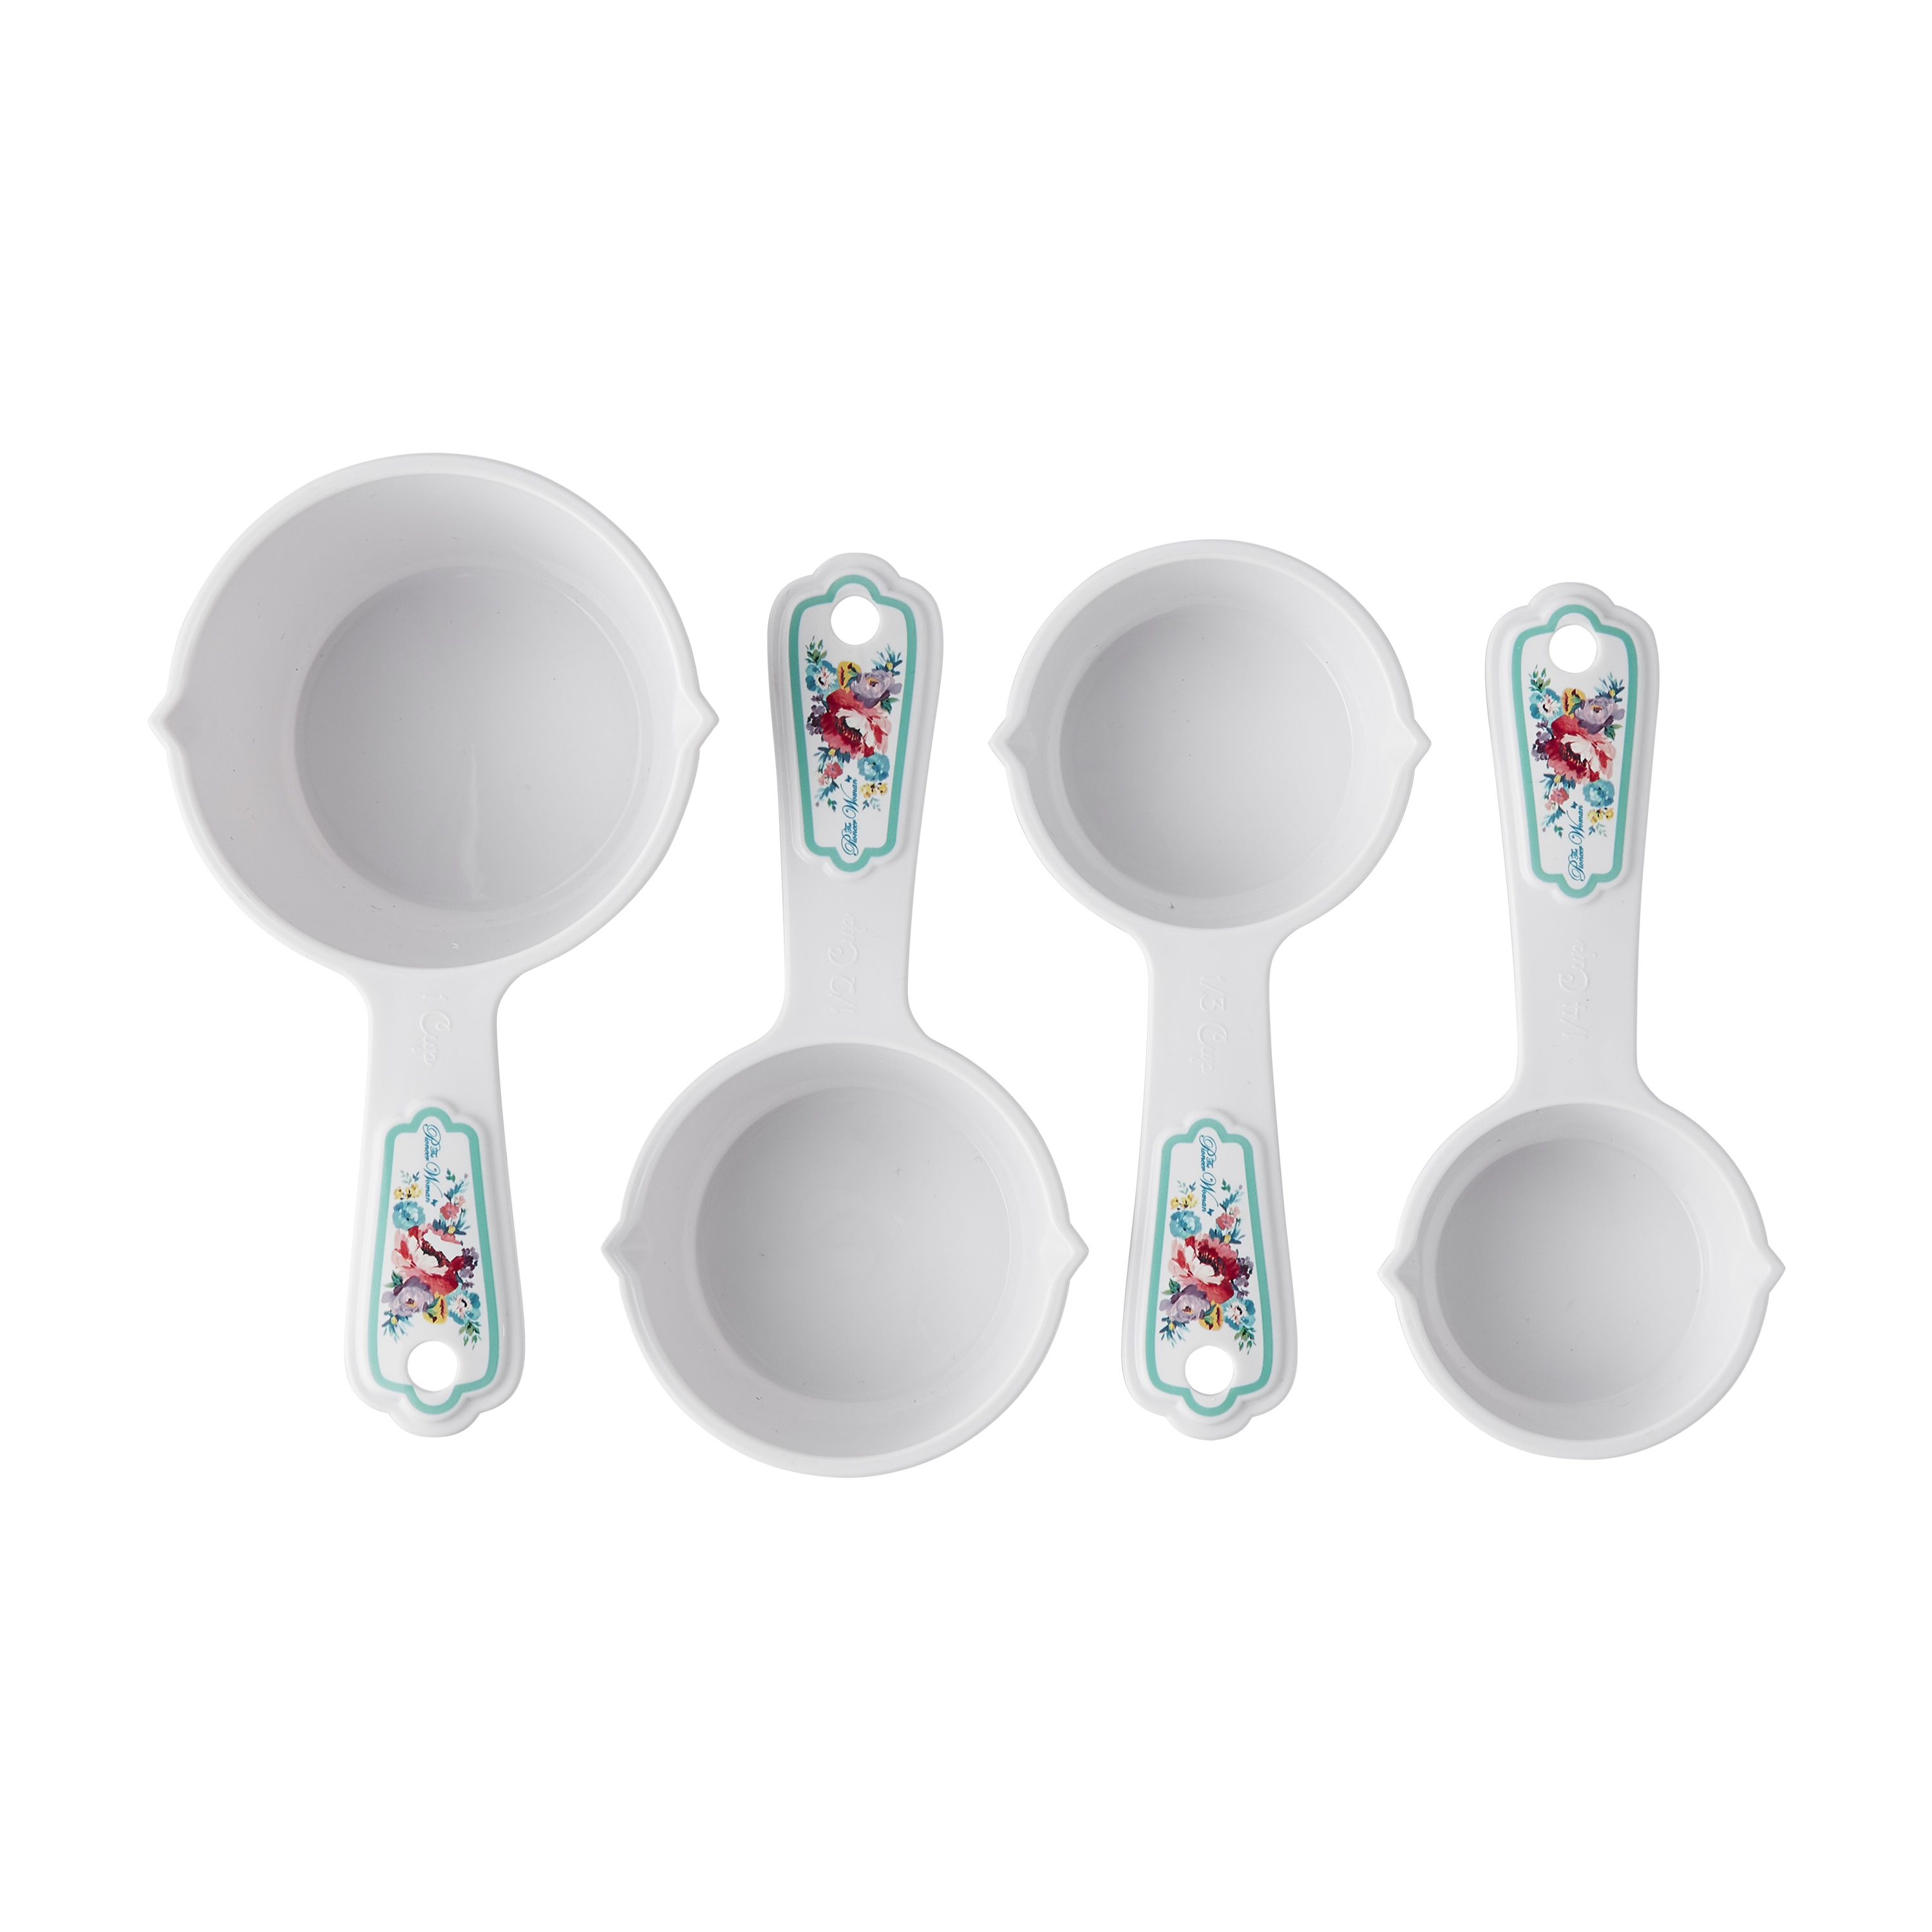 The Pioneer Woman 20-Piece Kitchen Gadget Set, Sweet Romance - image 6 of 7